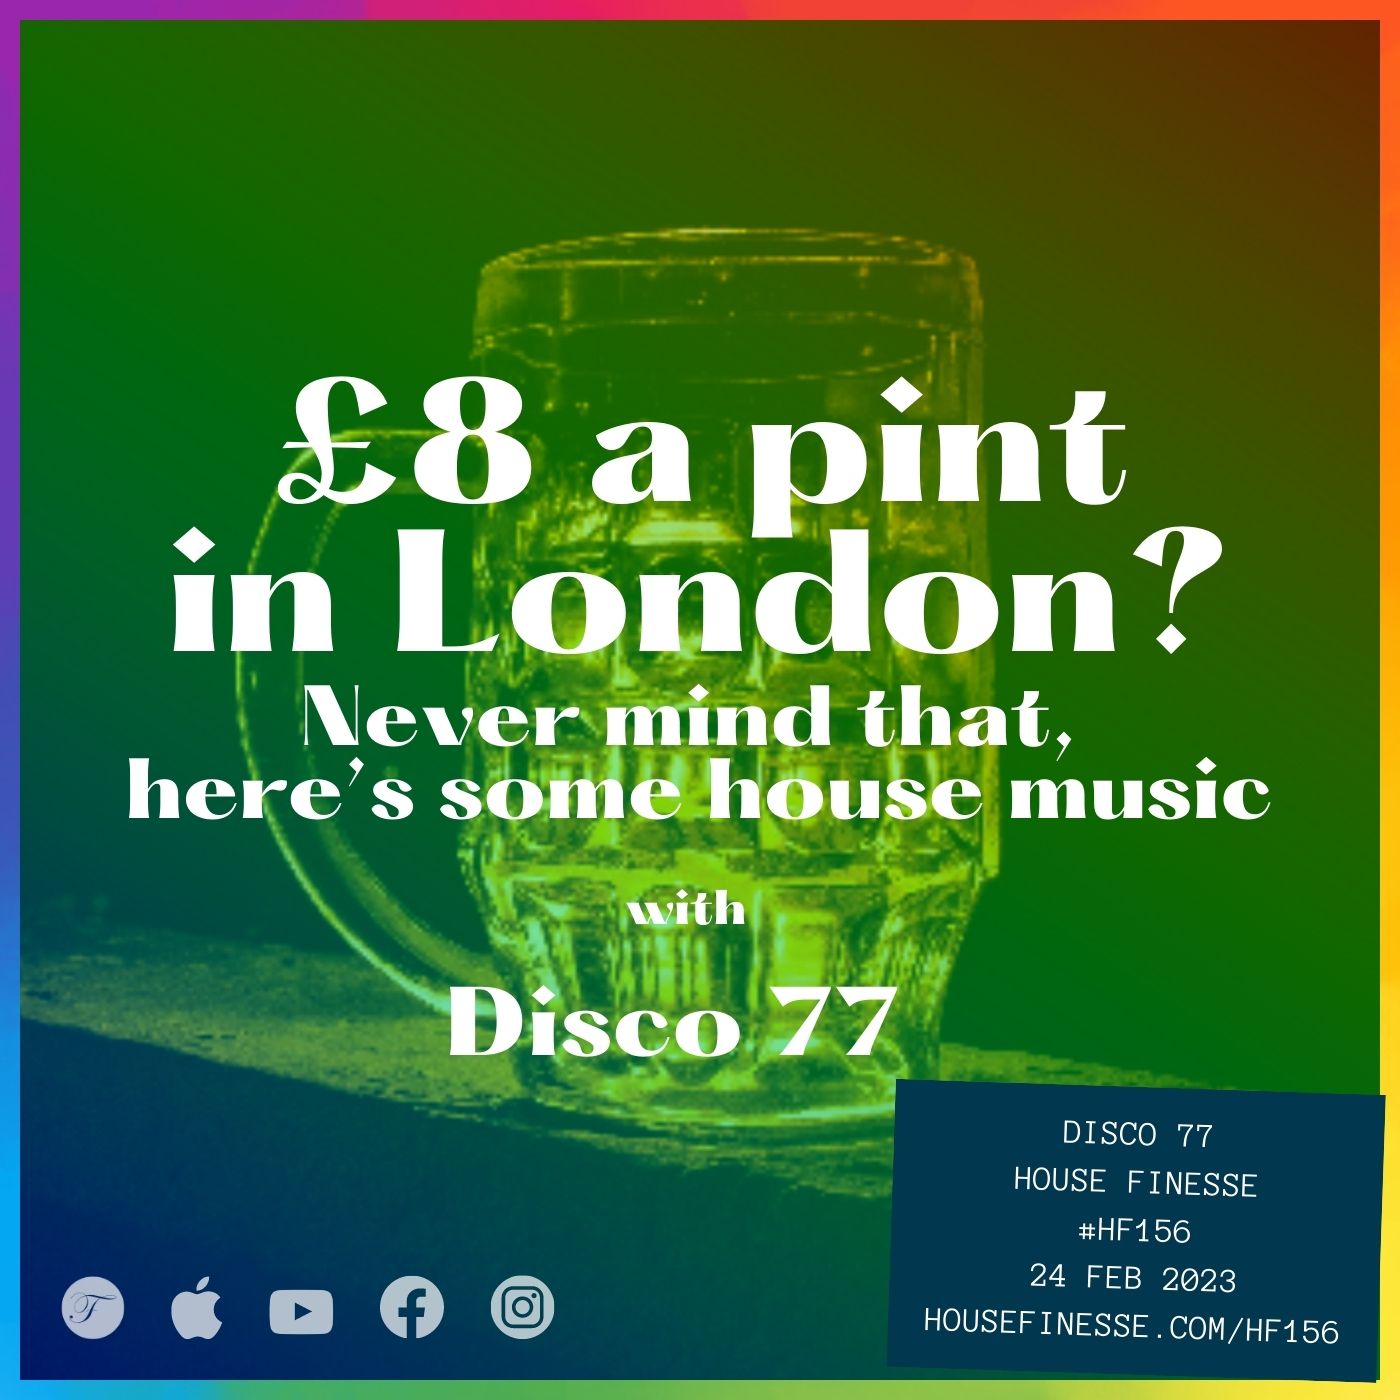 £8 a pint in London? Never mind that, here's some house music with Disco77